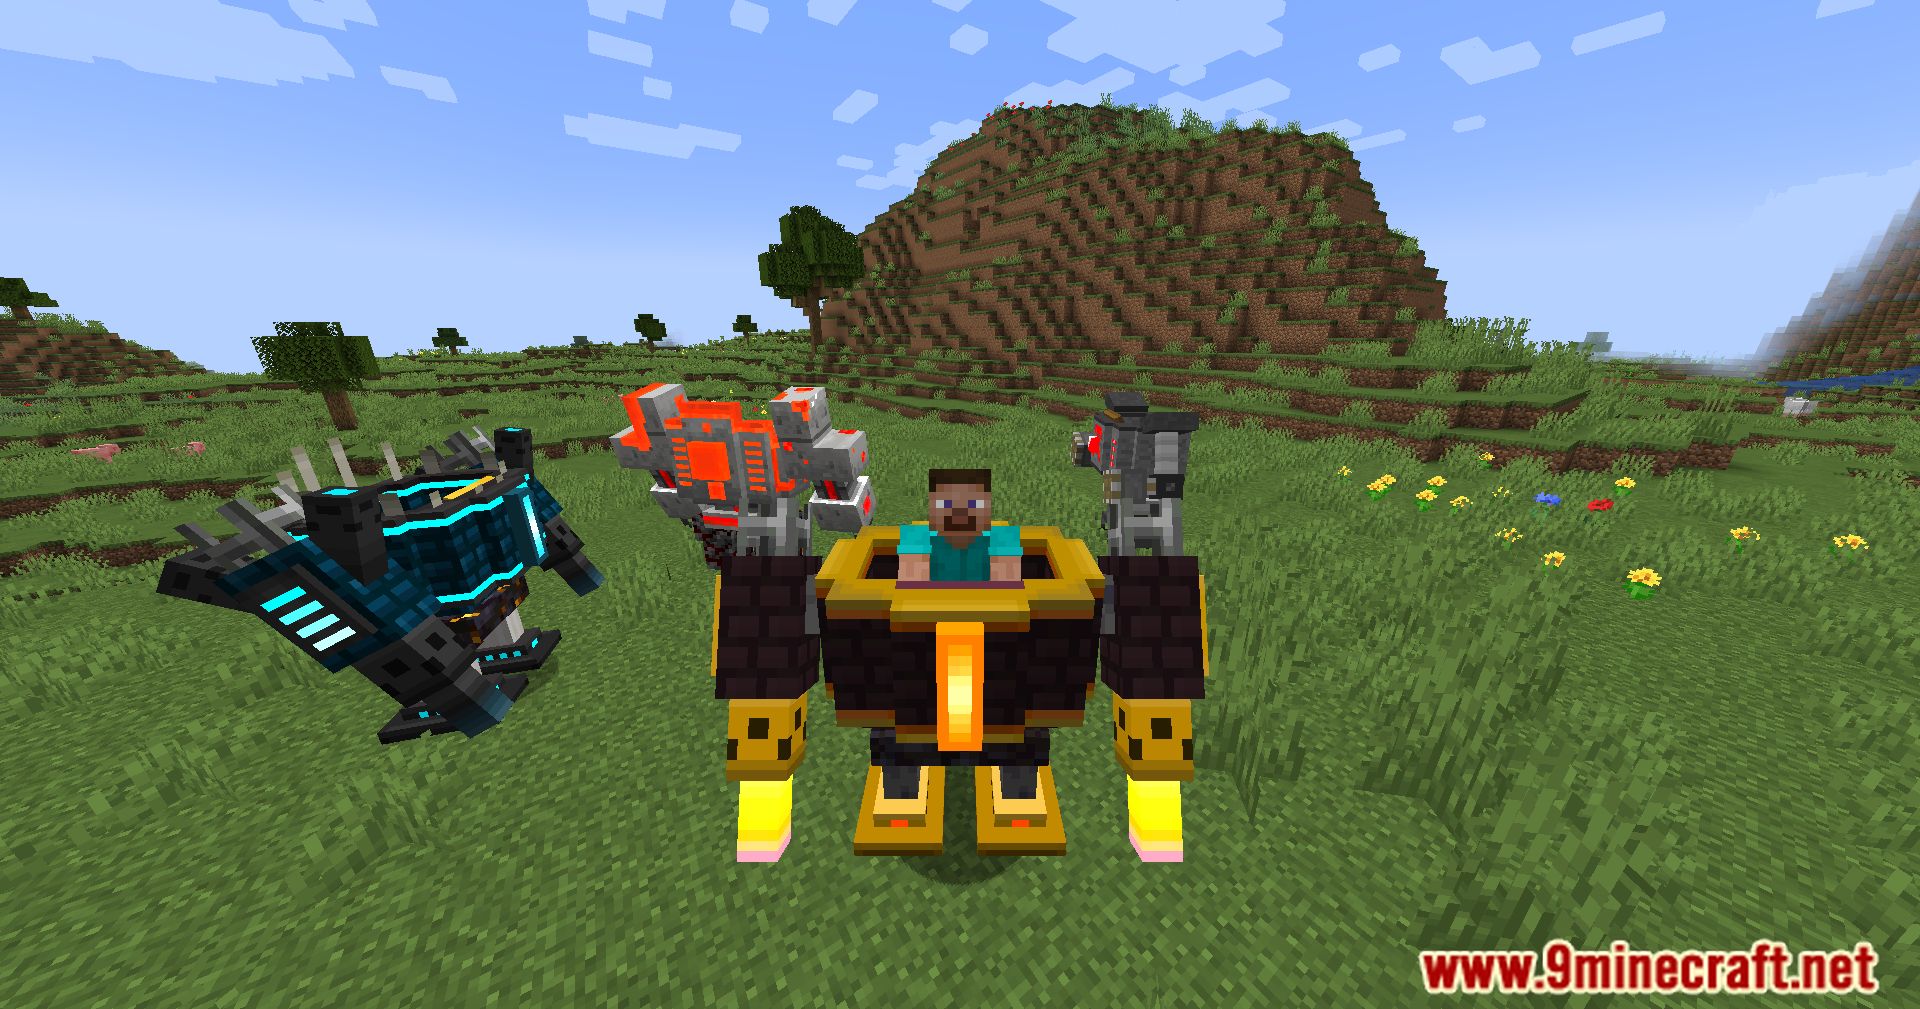 Armored Redstone Mod (1.20.1, 1.19.3) - Forge Your Path With Redstone-Powered Adventures! 15